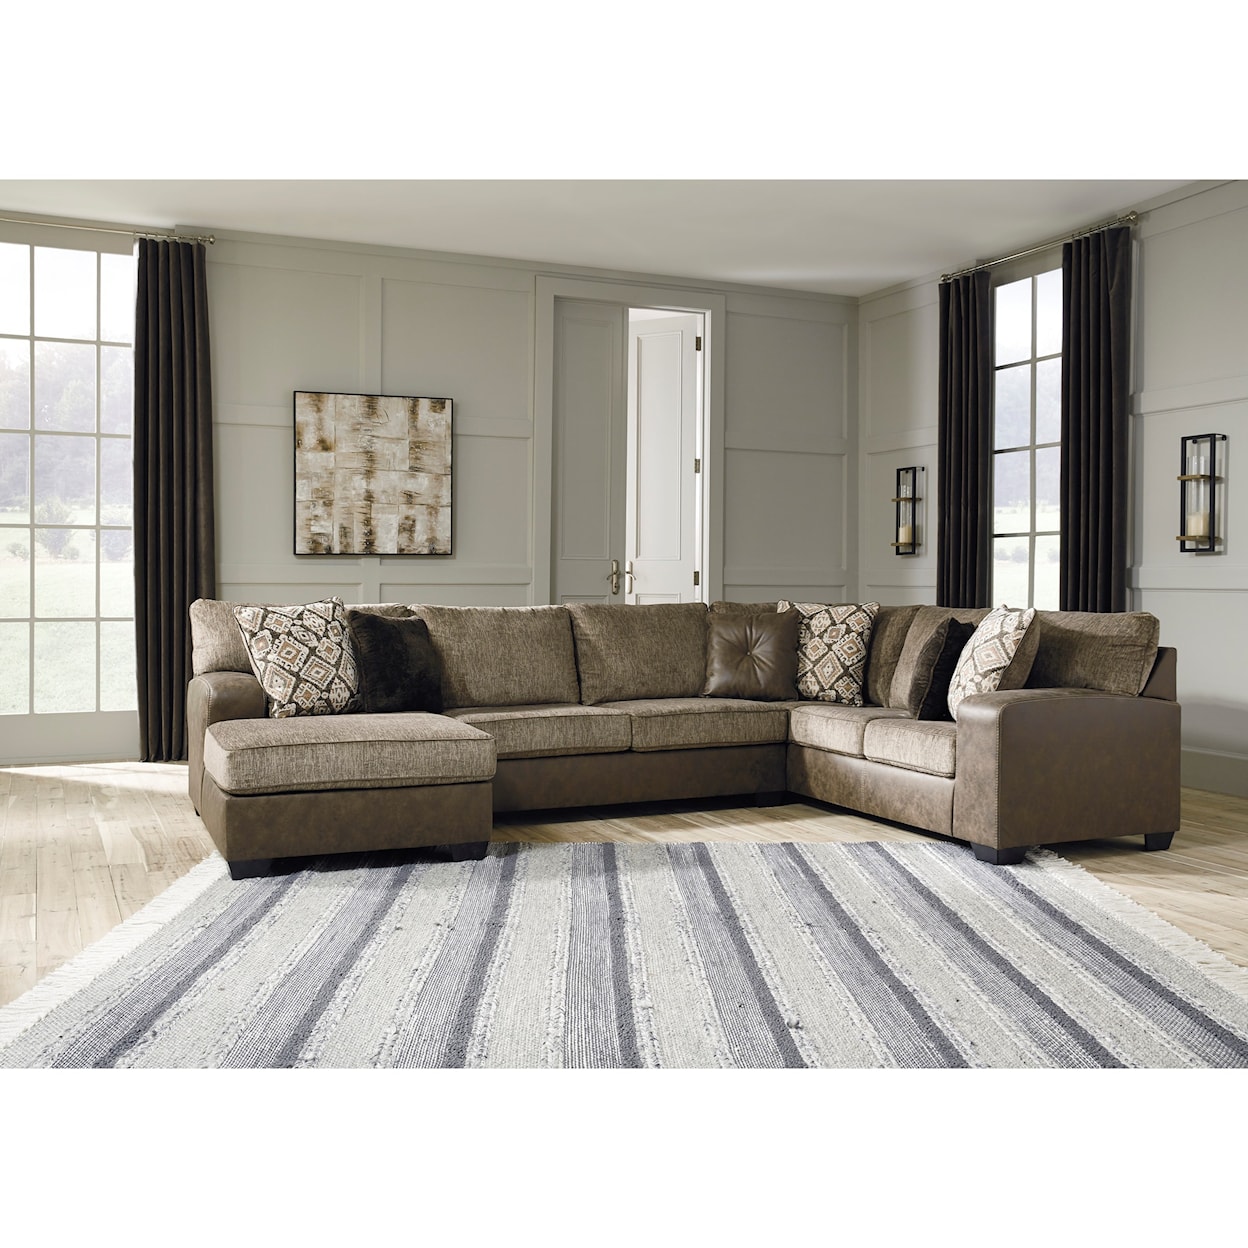 Benchcraft Abalone 3-Piece Sectional